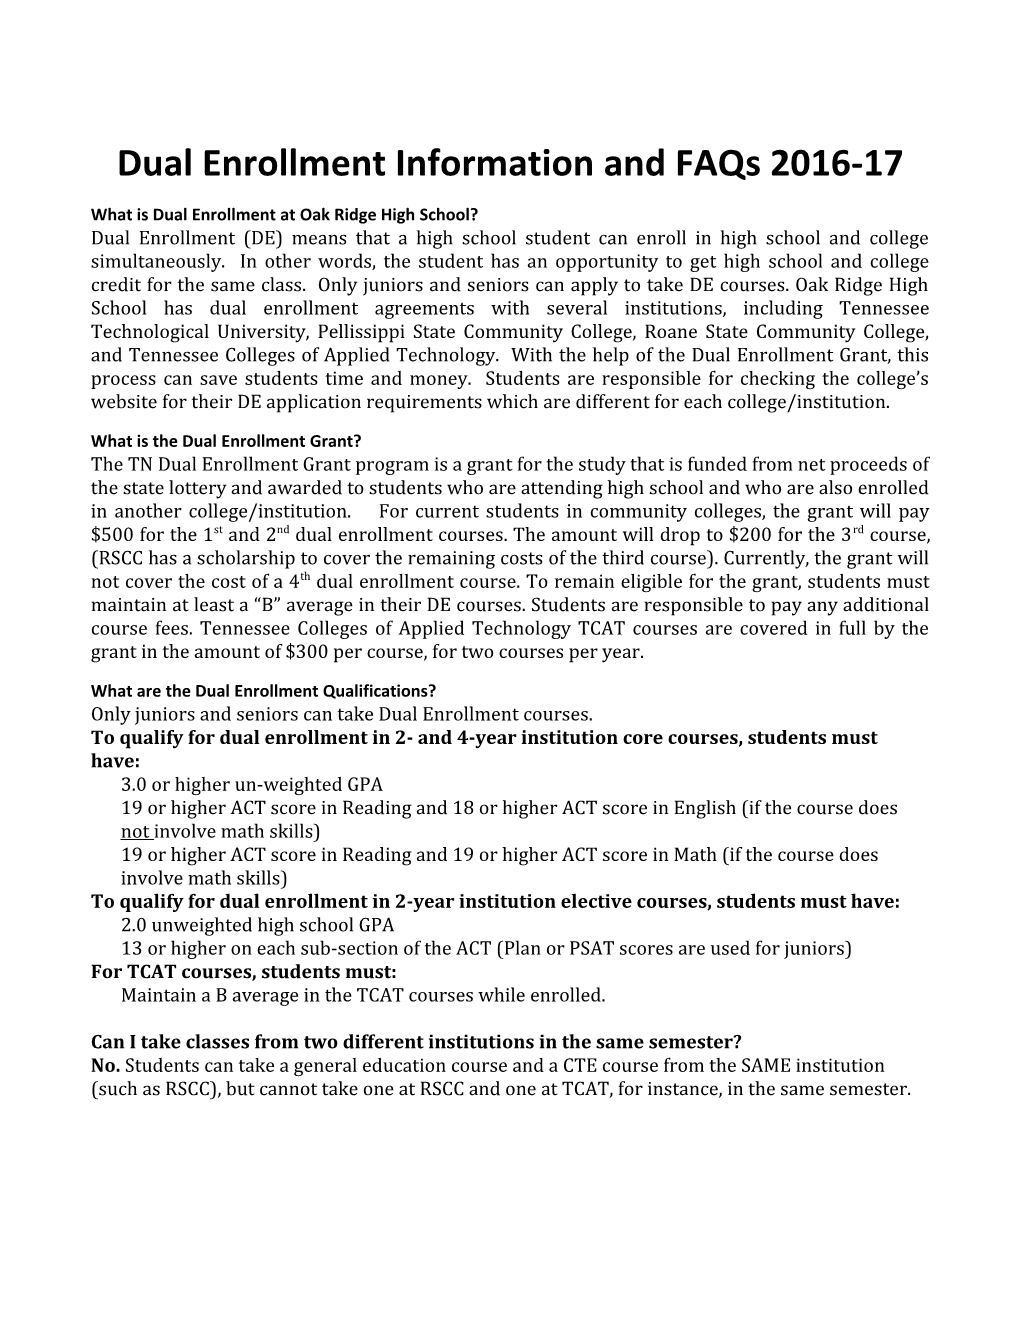 Dual Enrollment Information and Faqs 2016-17